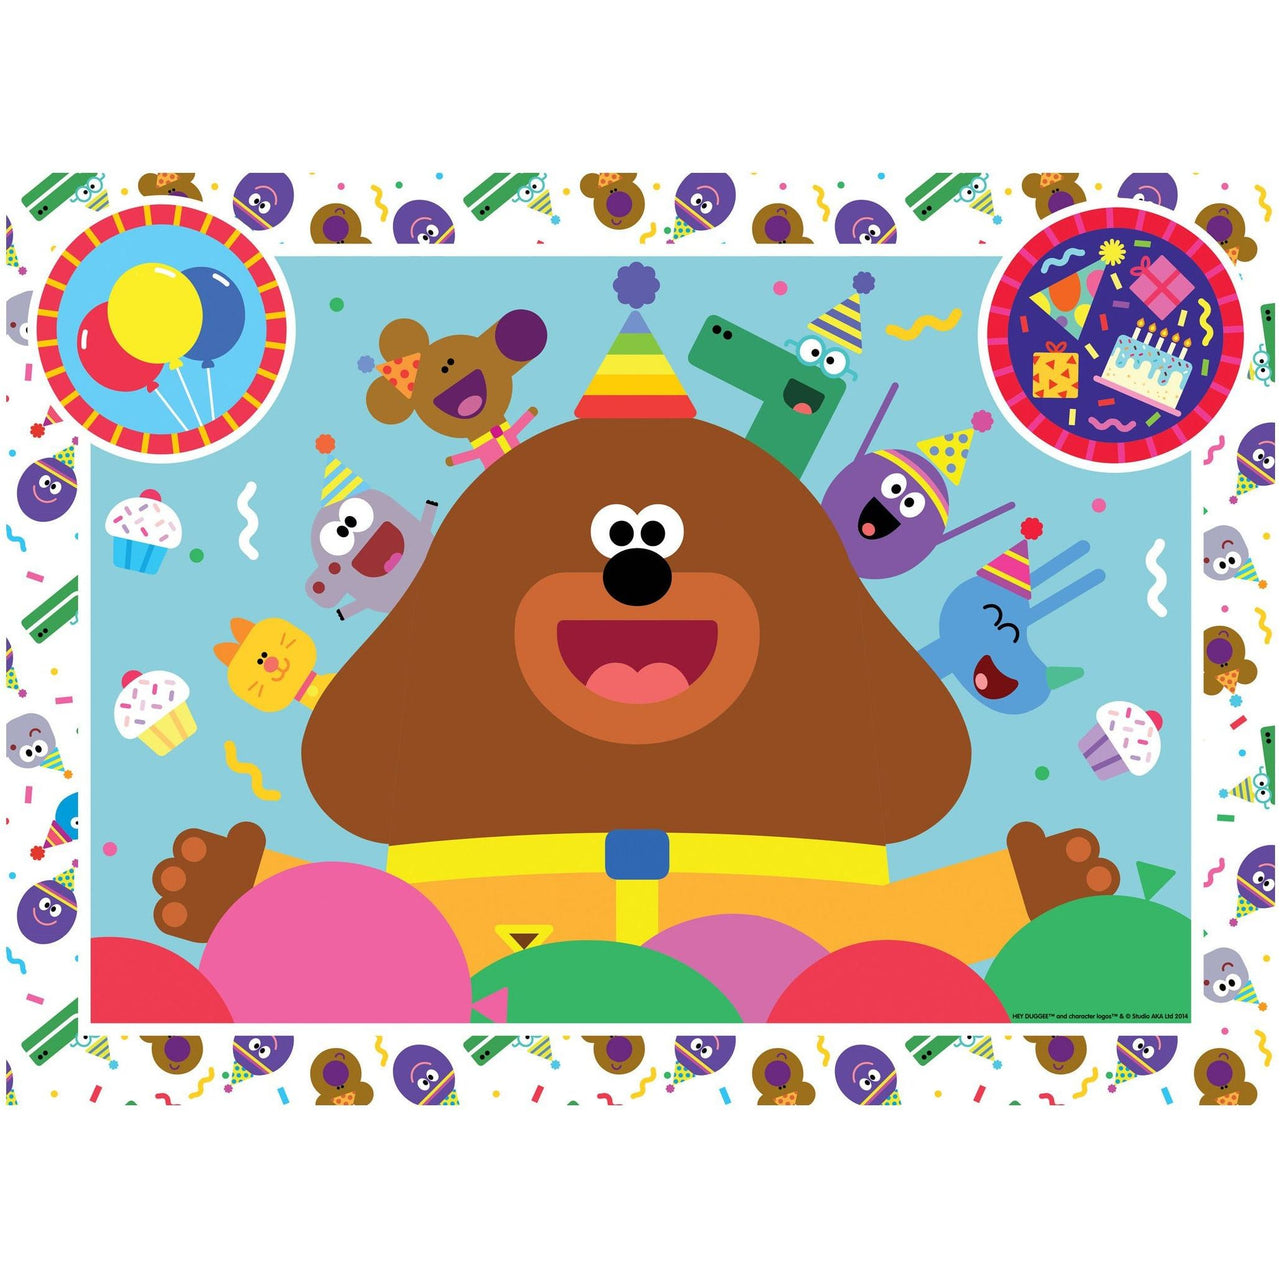 My First Puzzle Hey Duggee 16 Piece Floor Puzzle Ravensburger